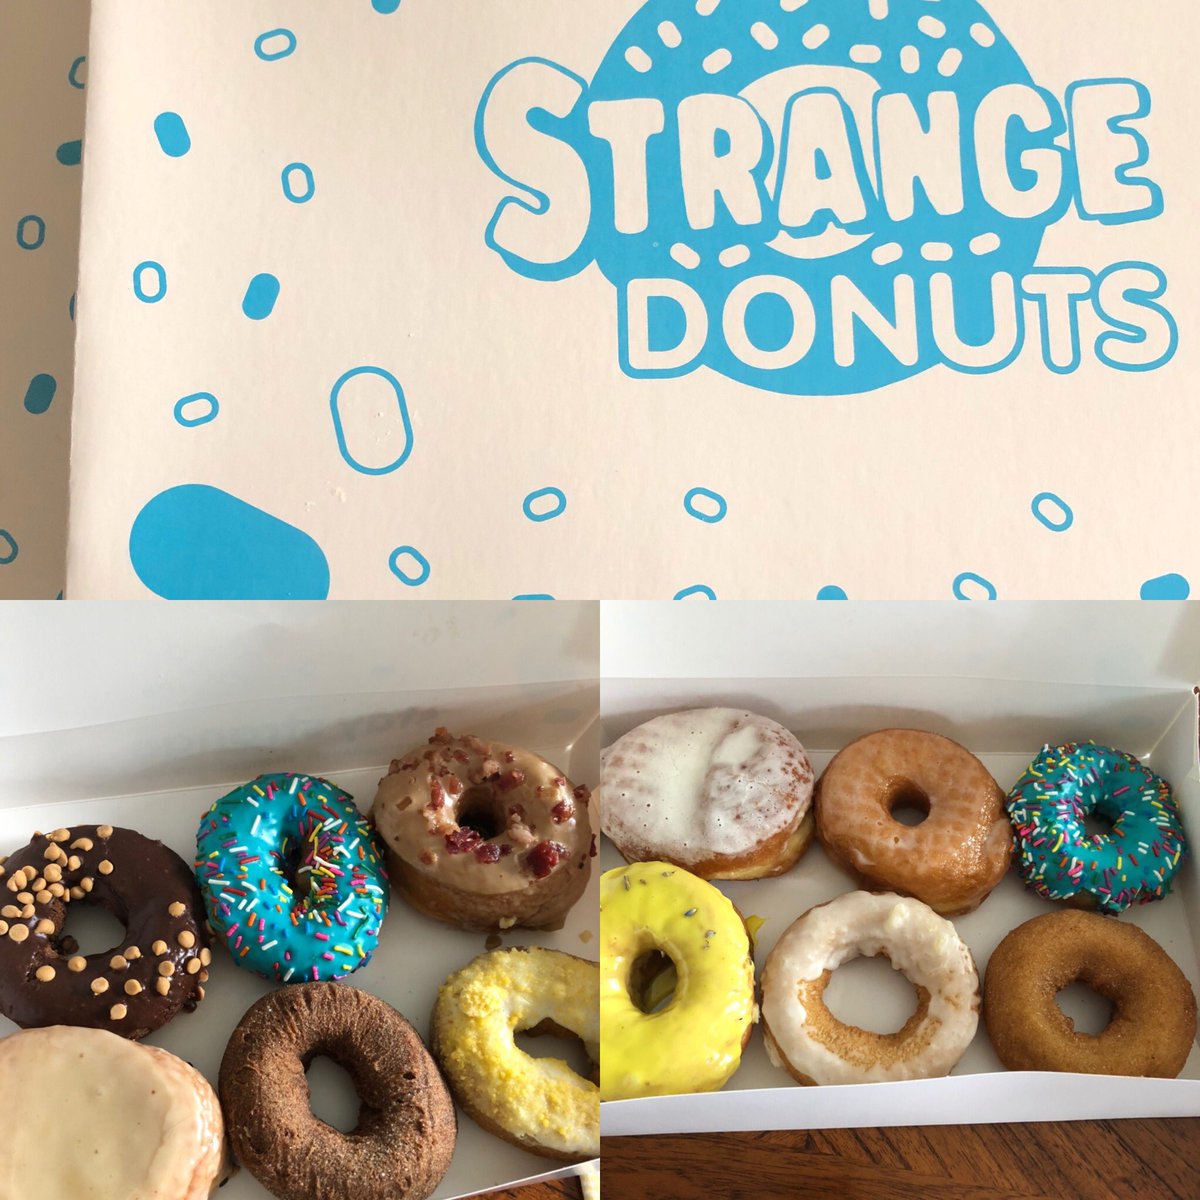 Thanks for the delivery @strangedonuts 😋🍩